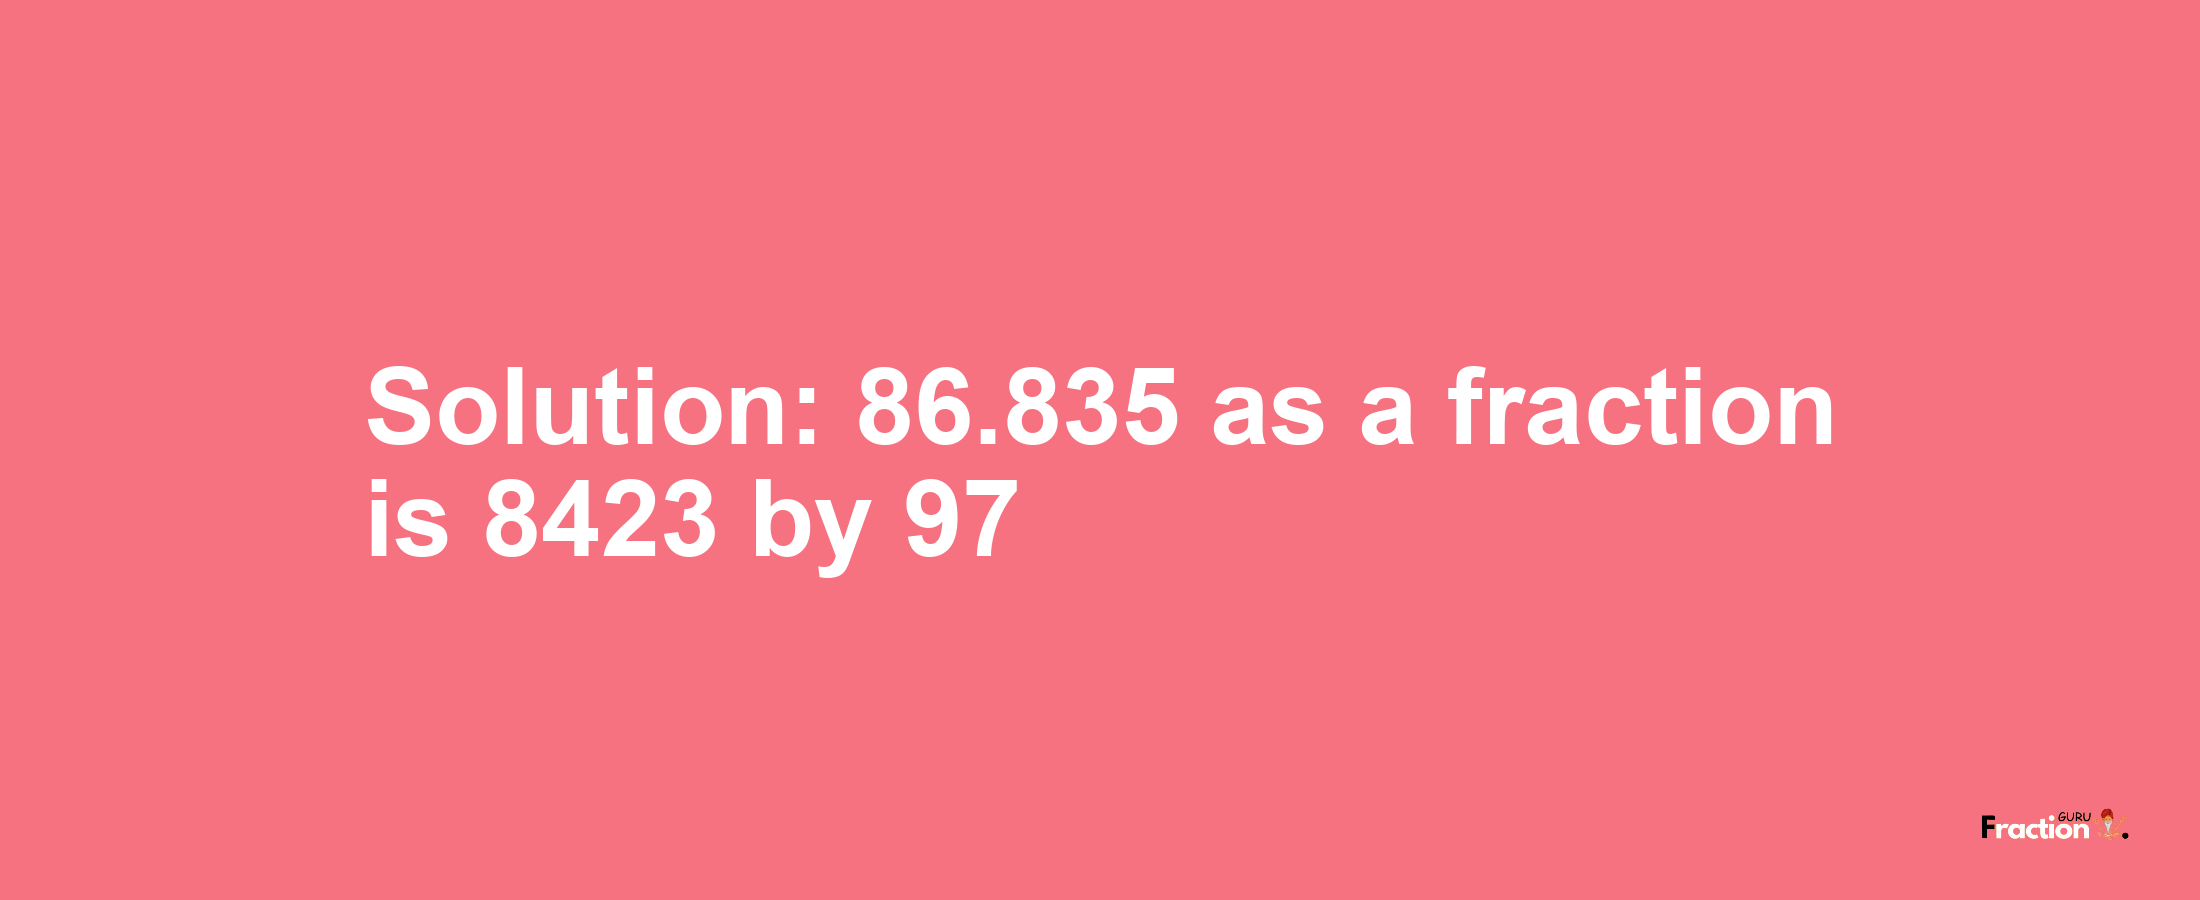 Solution:86.835 as a fraction is 8423/97